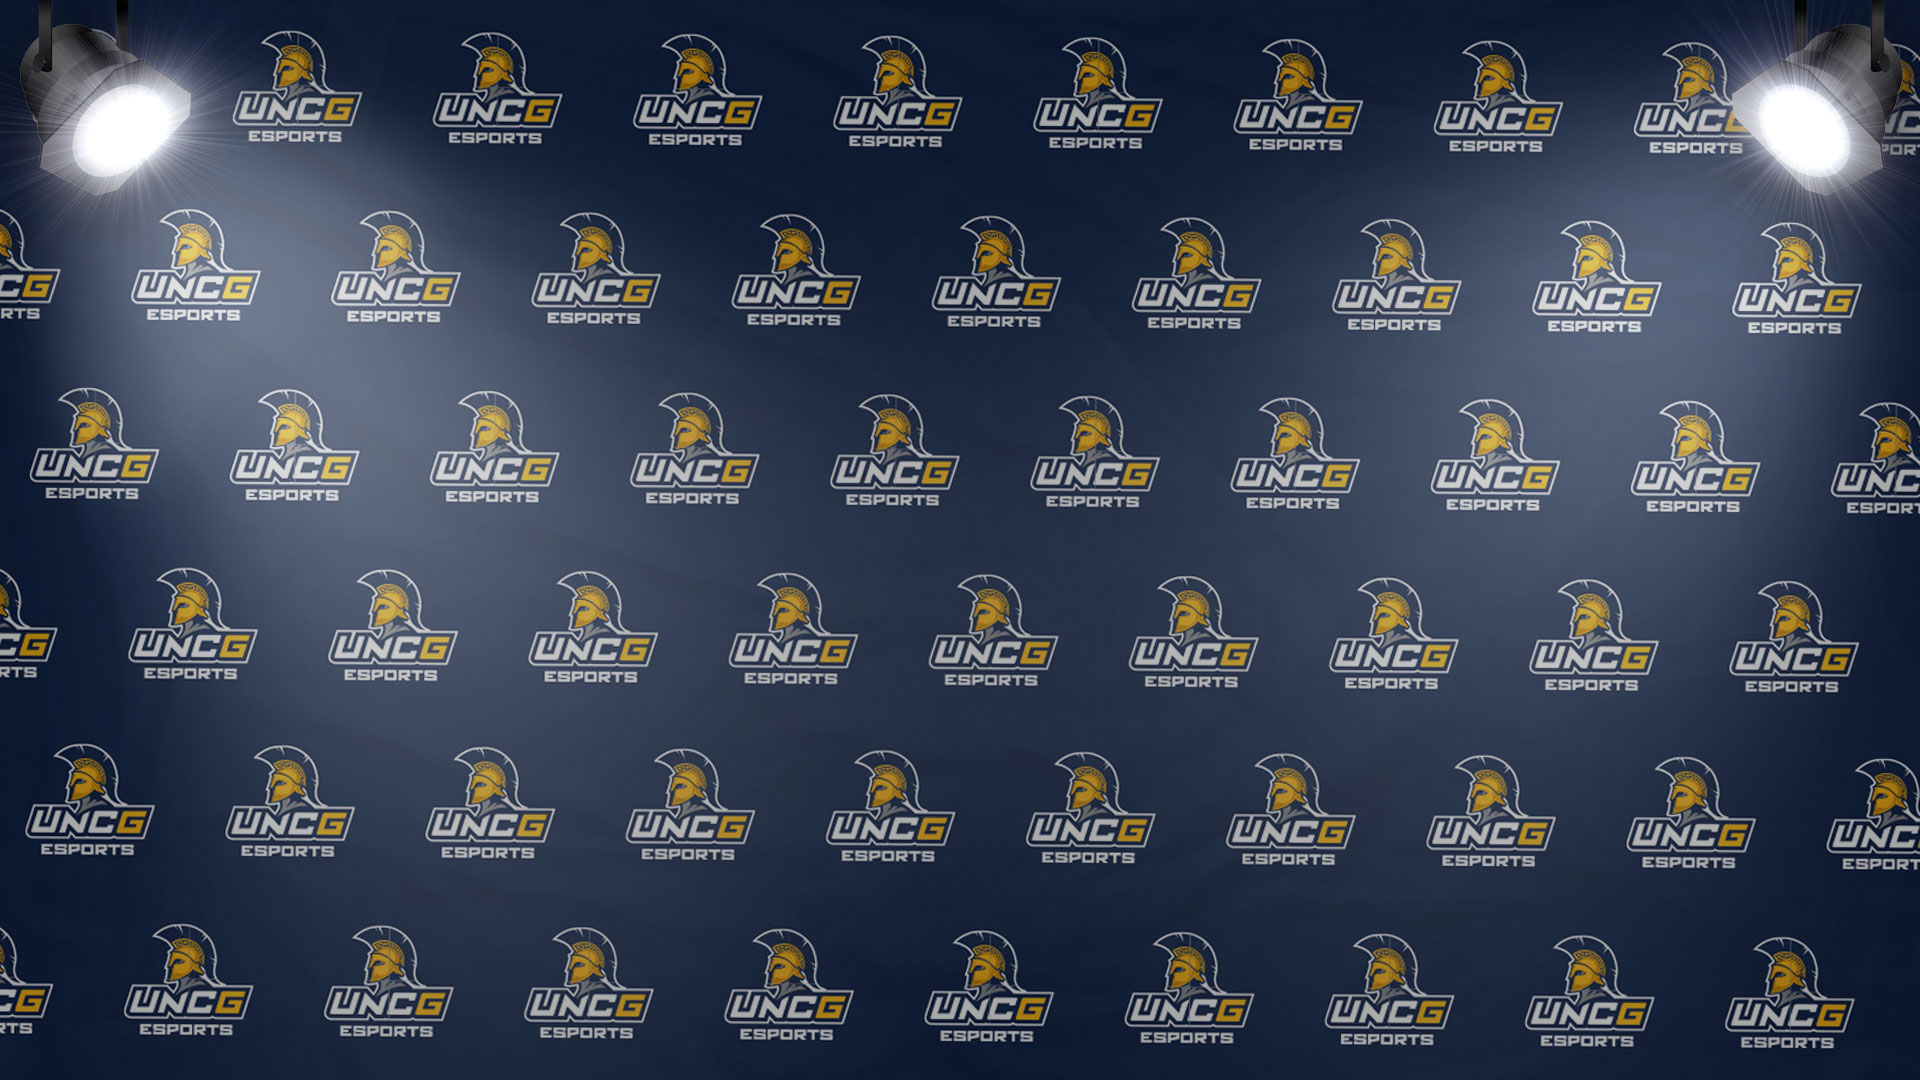 Blue Background of the UNCG Esports logo in a step and repeat pattern